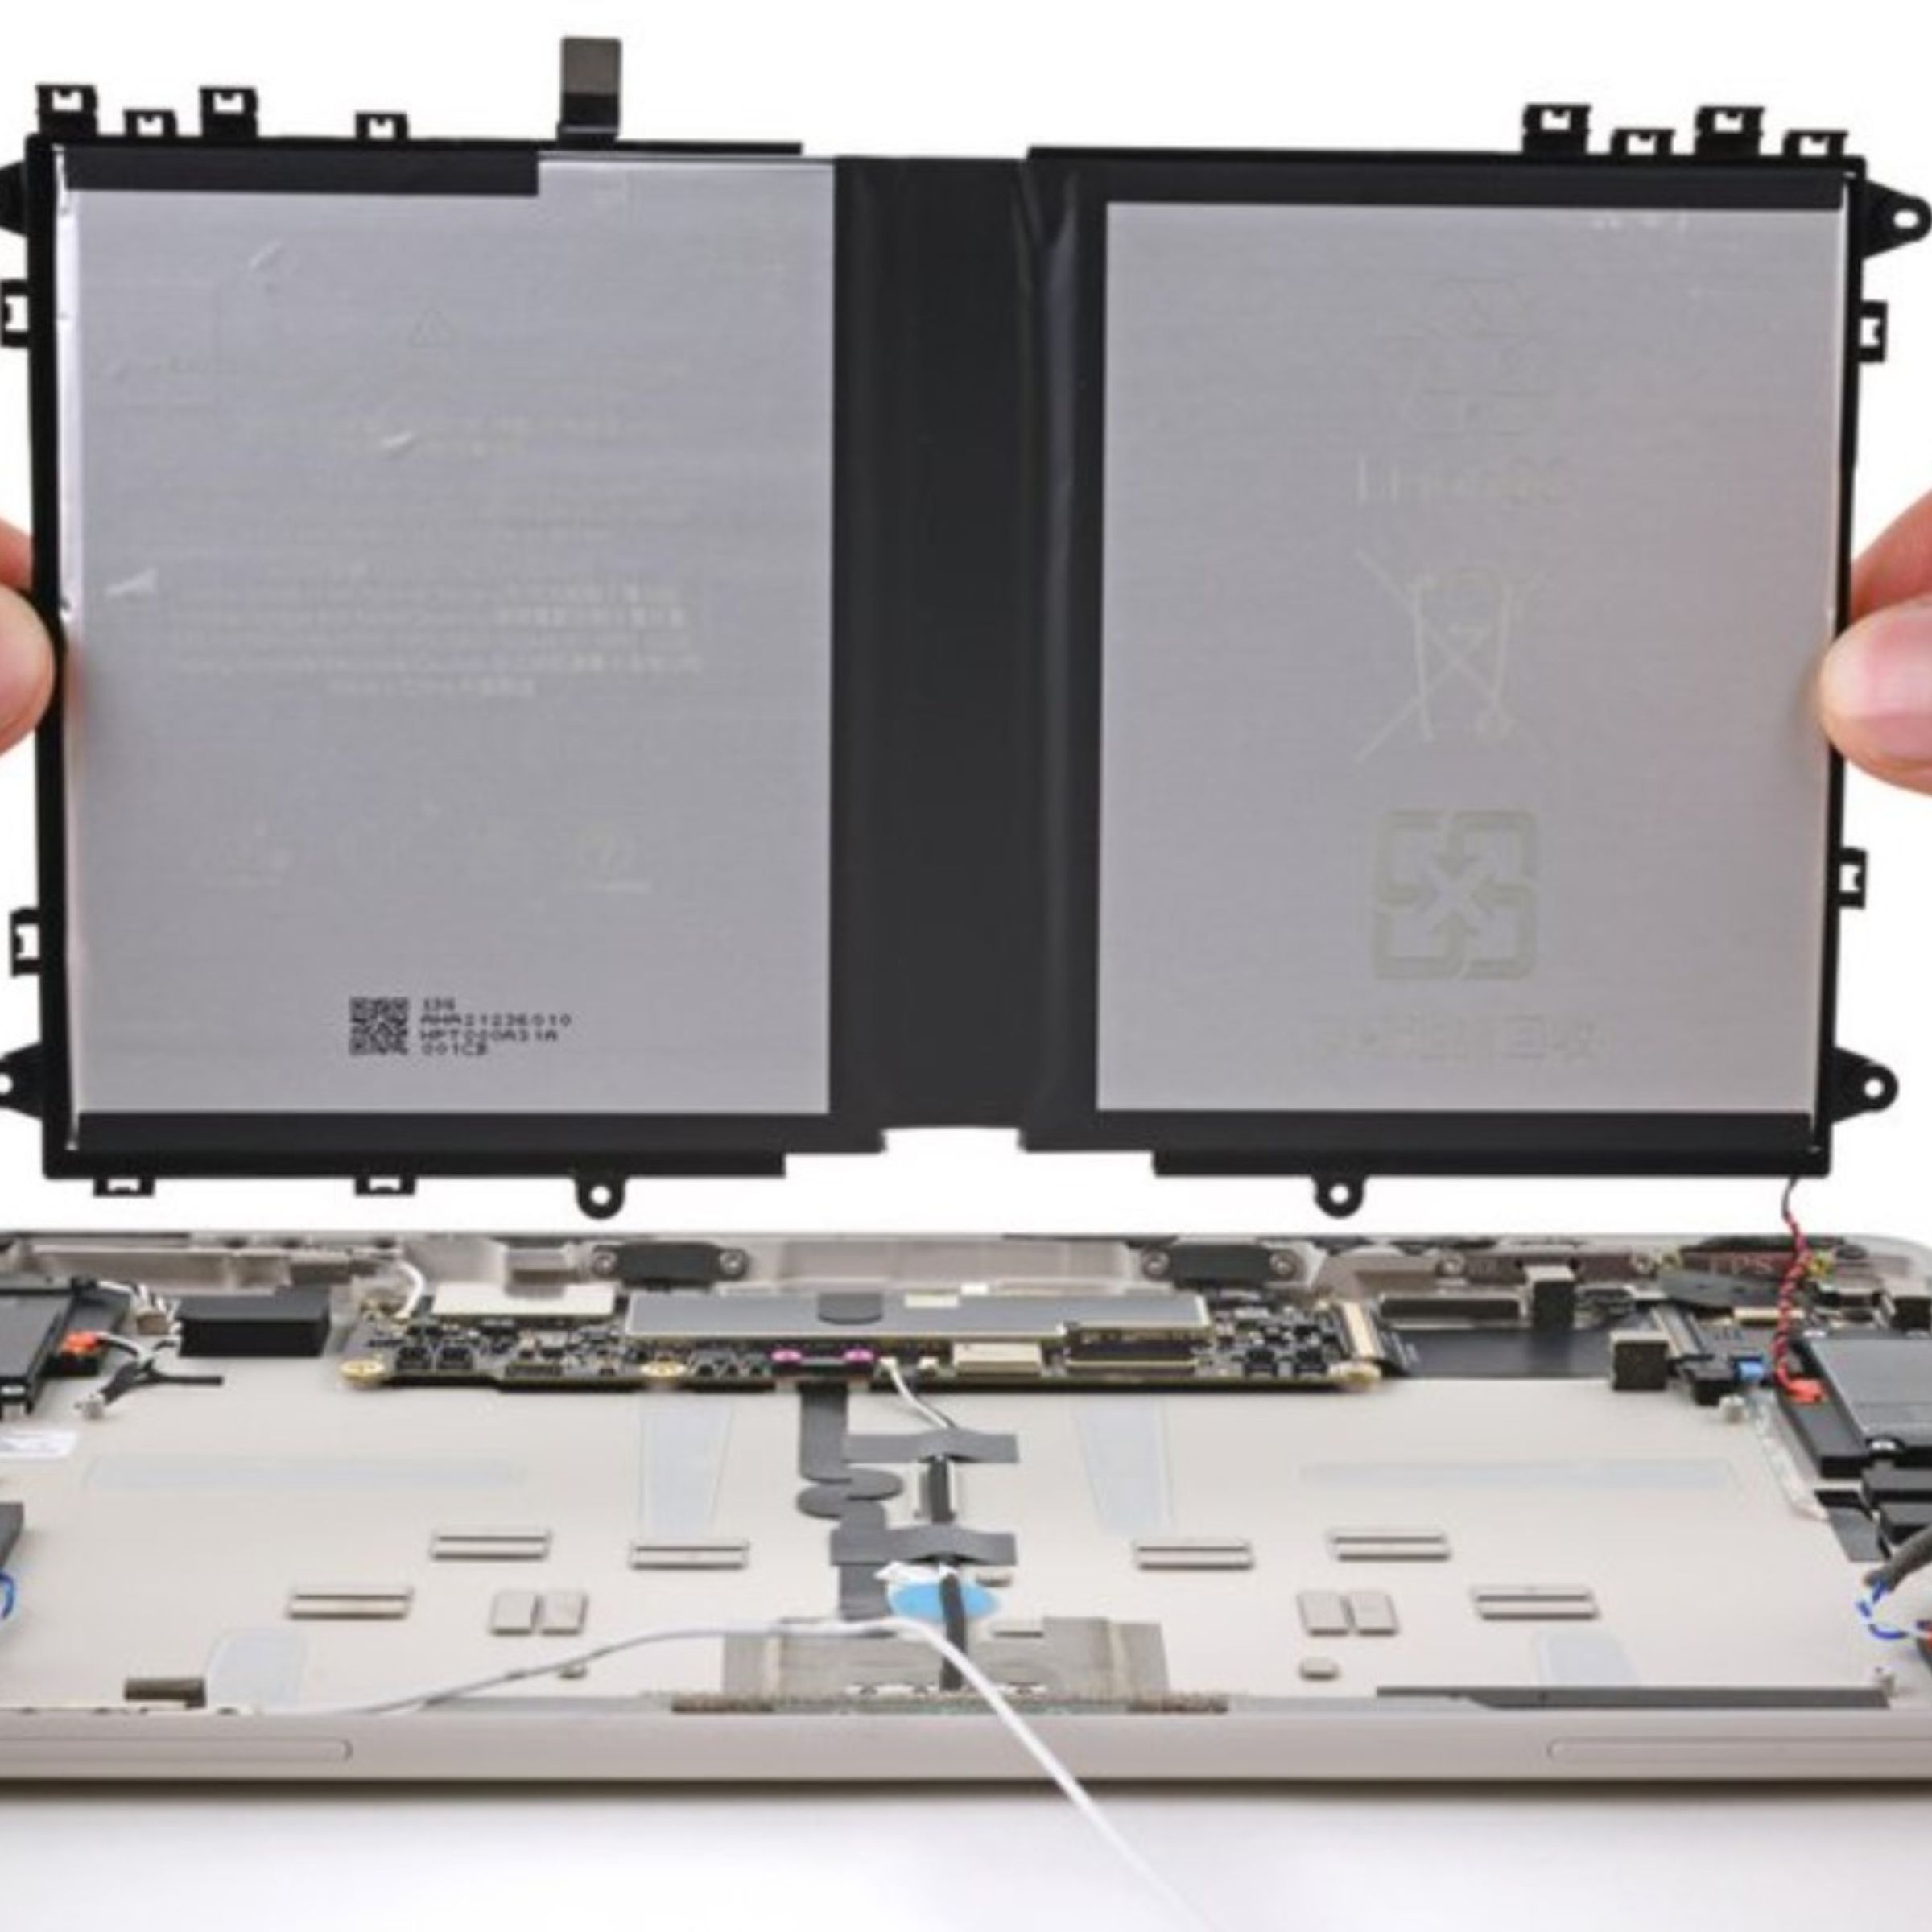 A picture of someone removing a Google Pixel tablet battery.